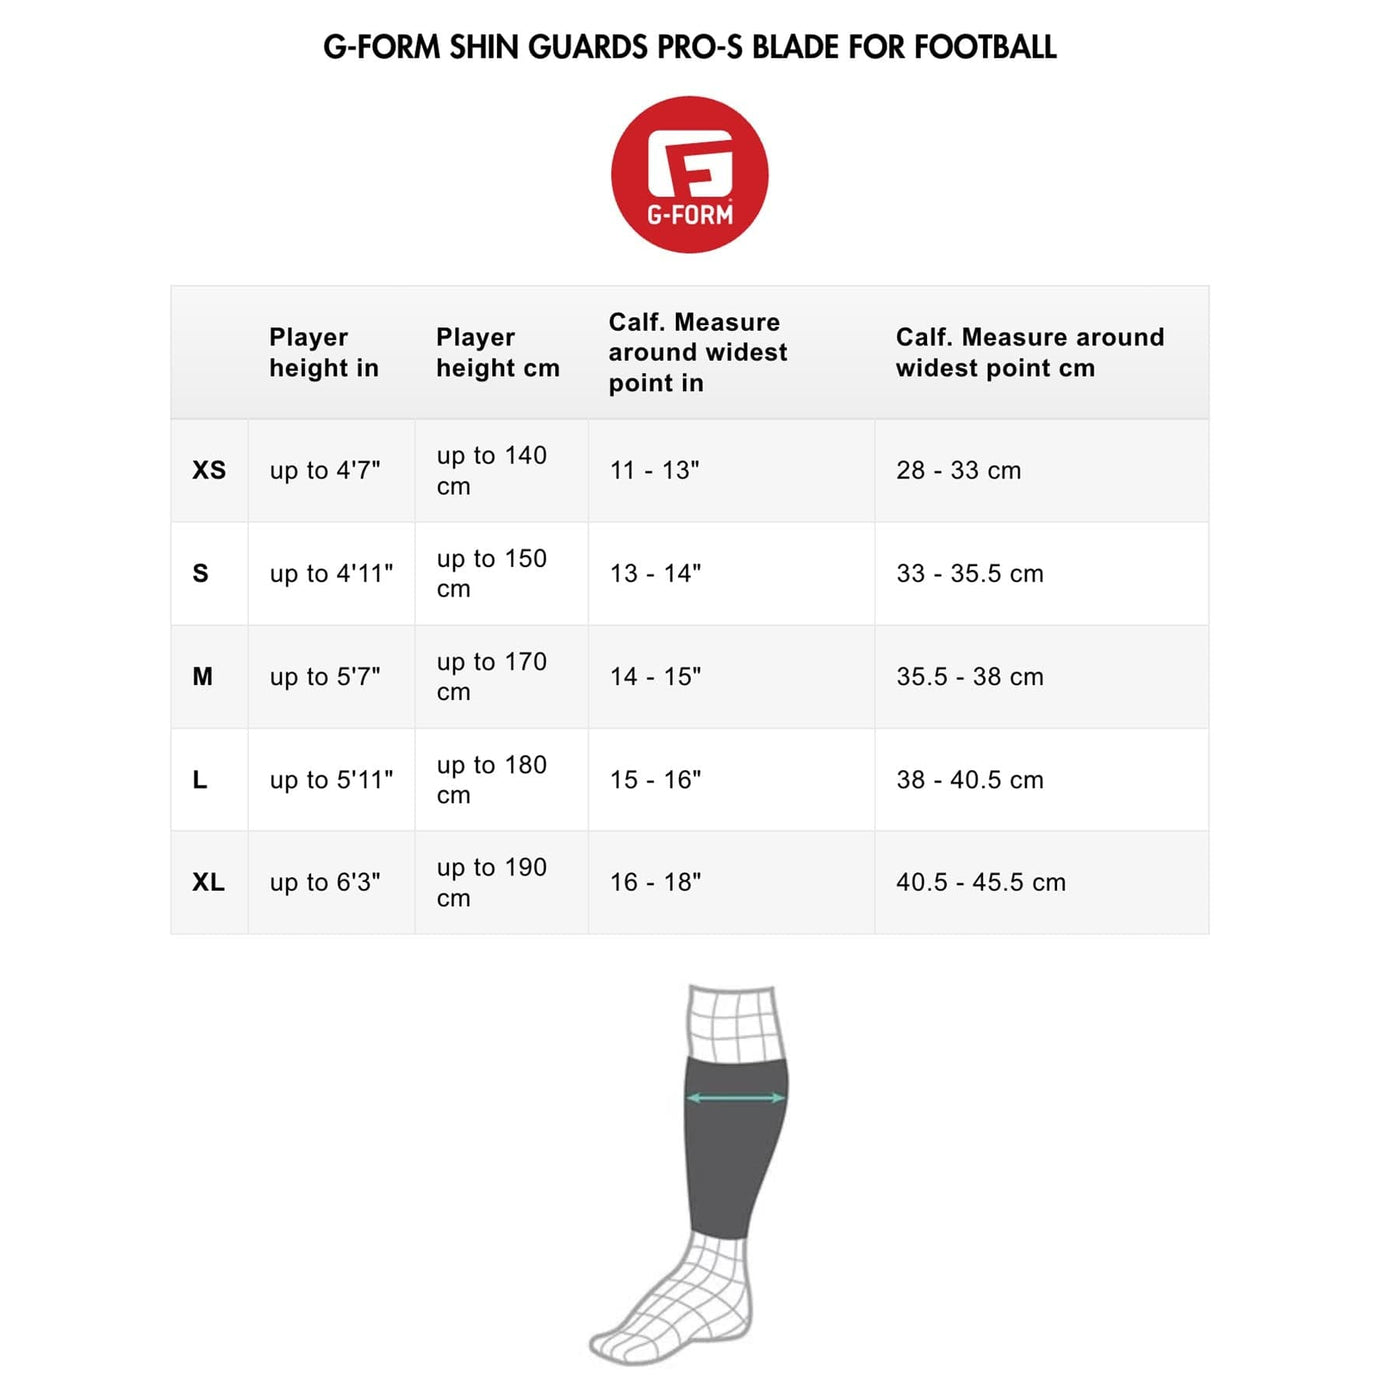 G-FORM SHIN GUARDS PRO-S BLADE FOR FOOTBALL SIZE CHART